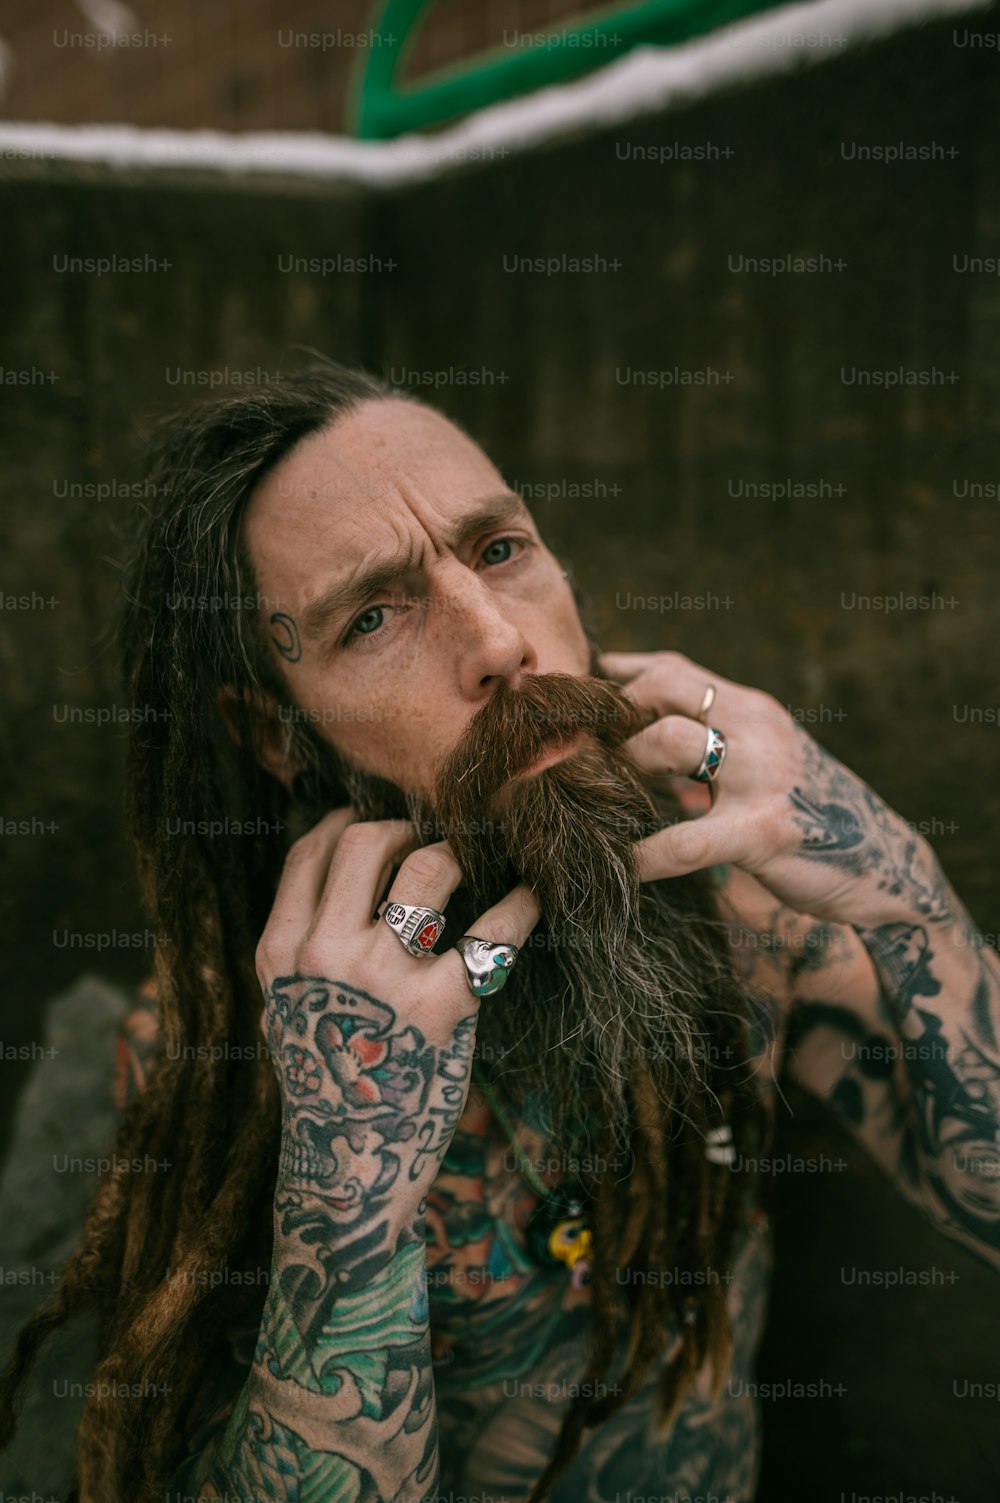 a man with long hair and tattoos on his face